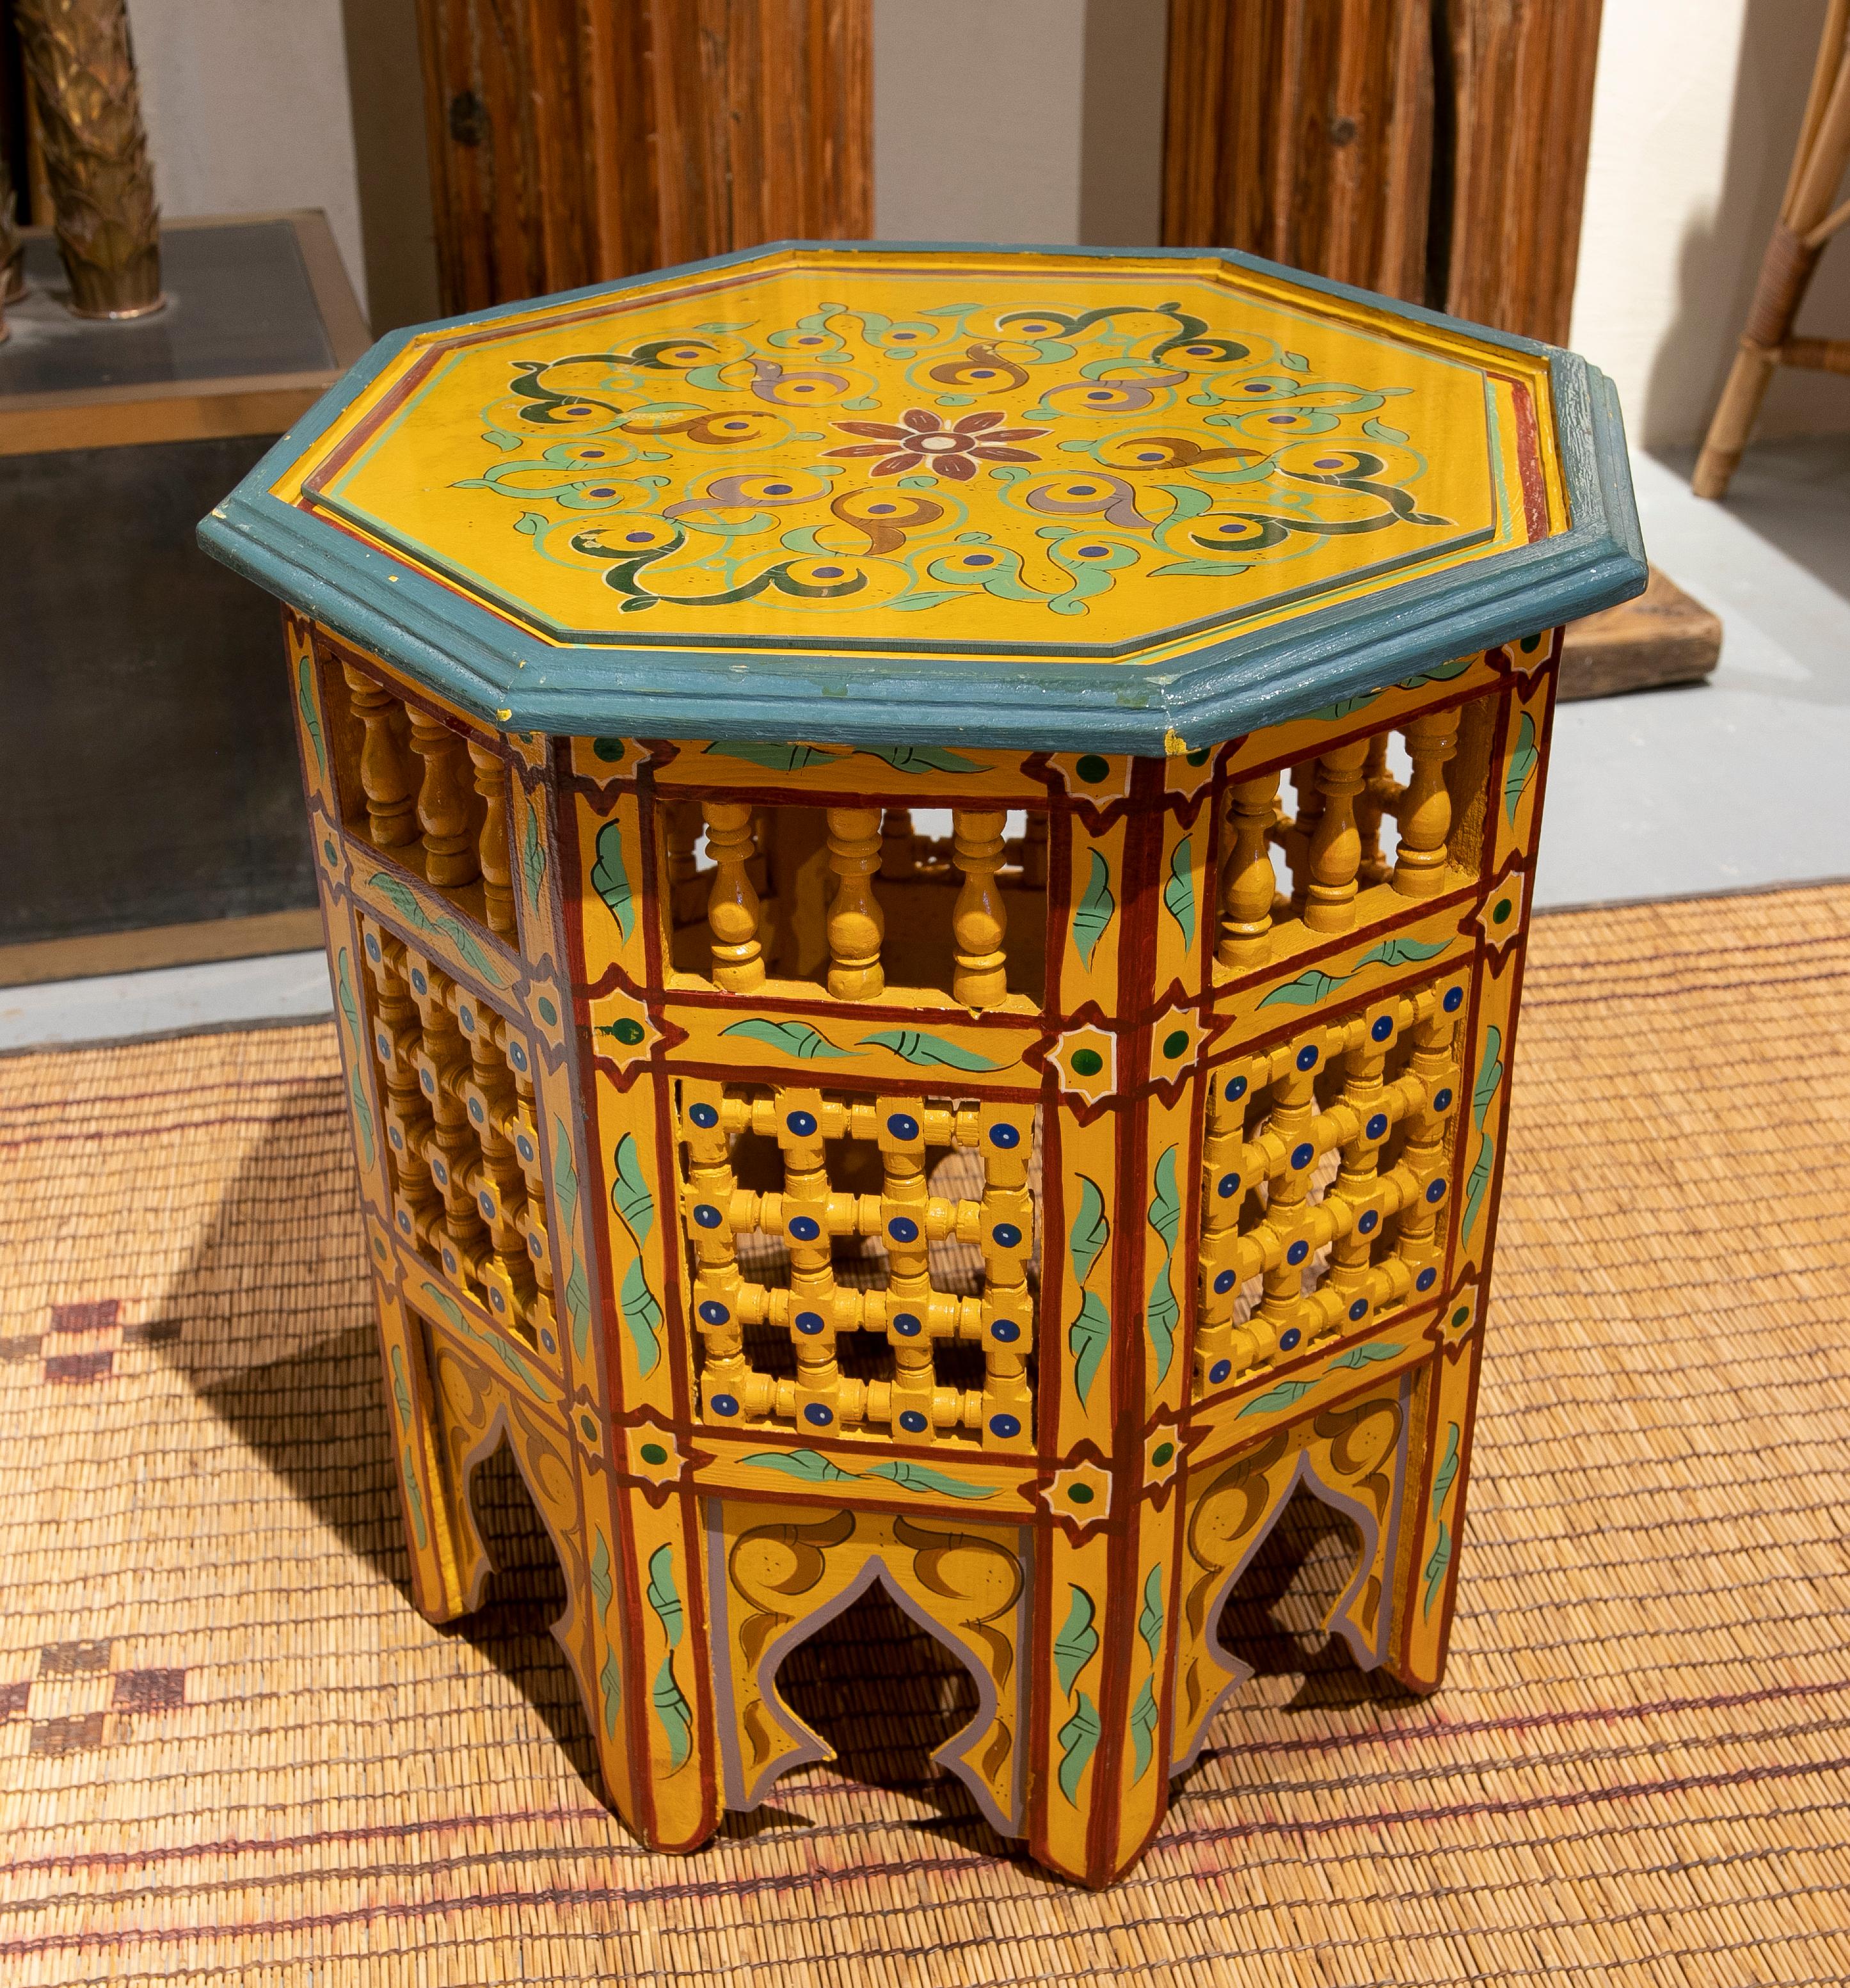 Moroccan Octagonal wooden sidetable handpainted in yellow and green